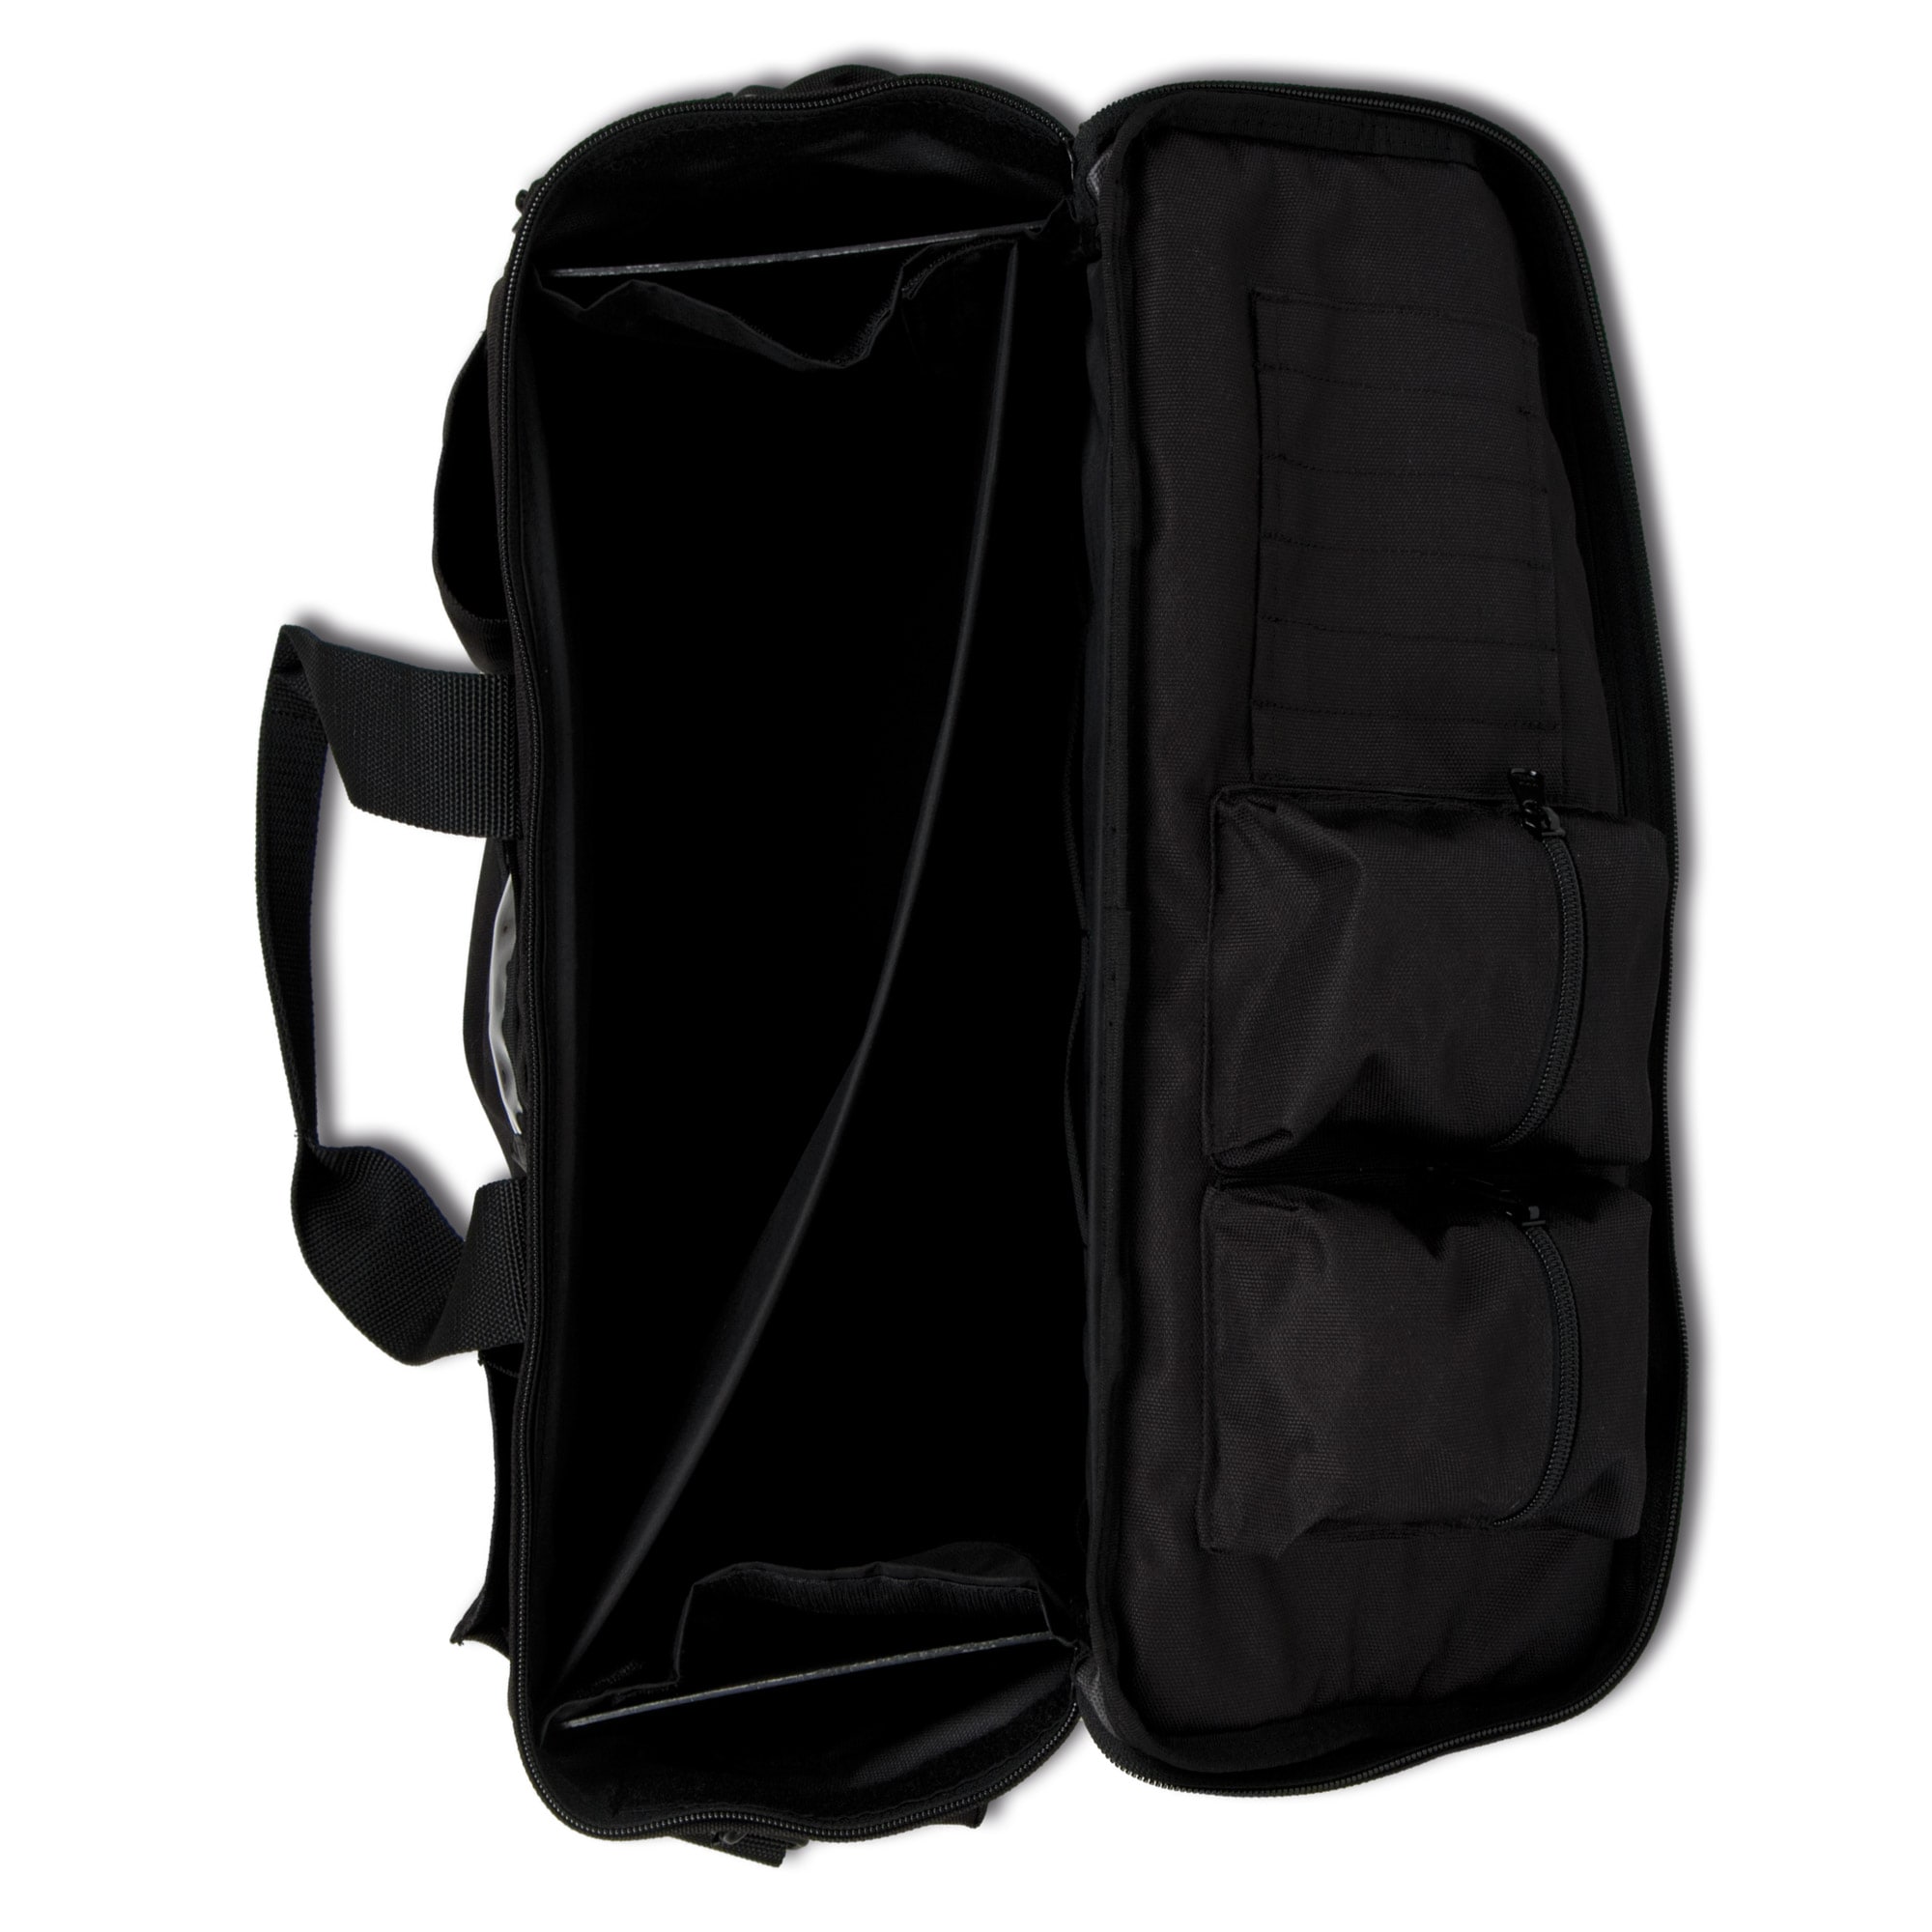 Purchase the Blackhawk Police Equipment Bag by ASMC